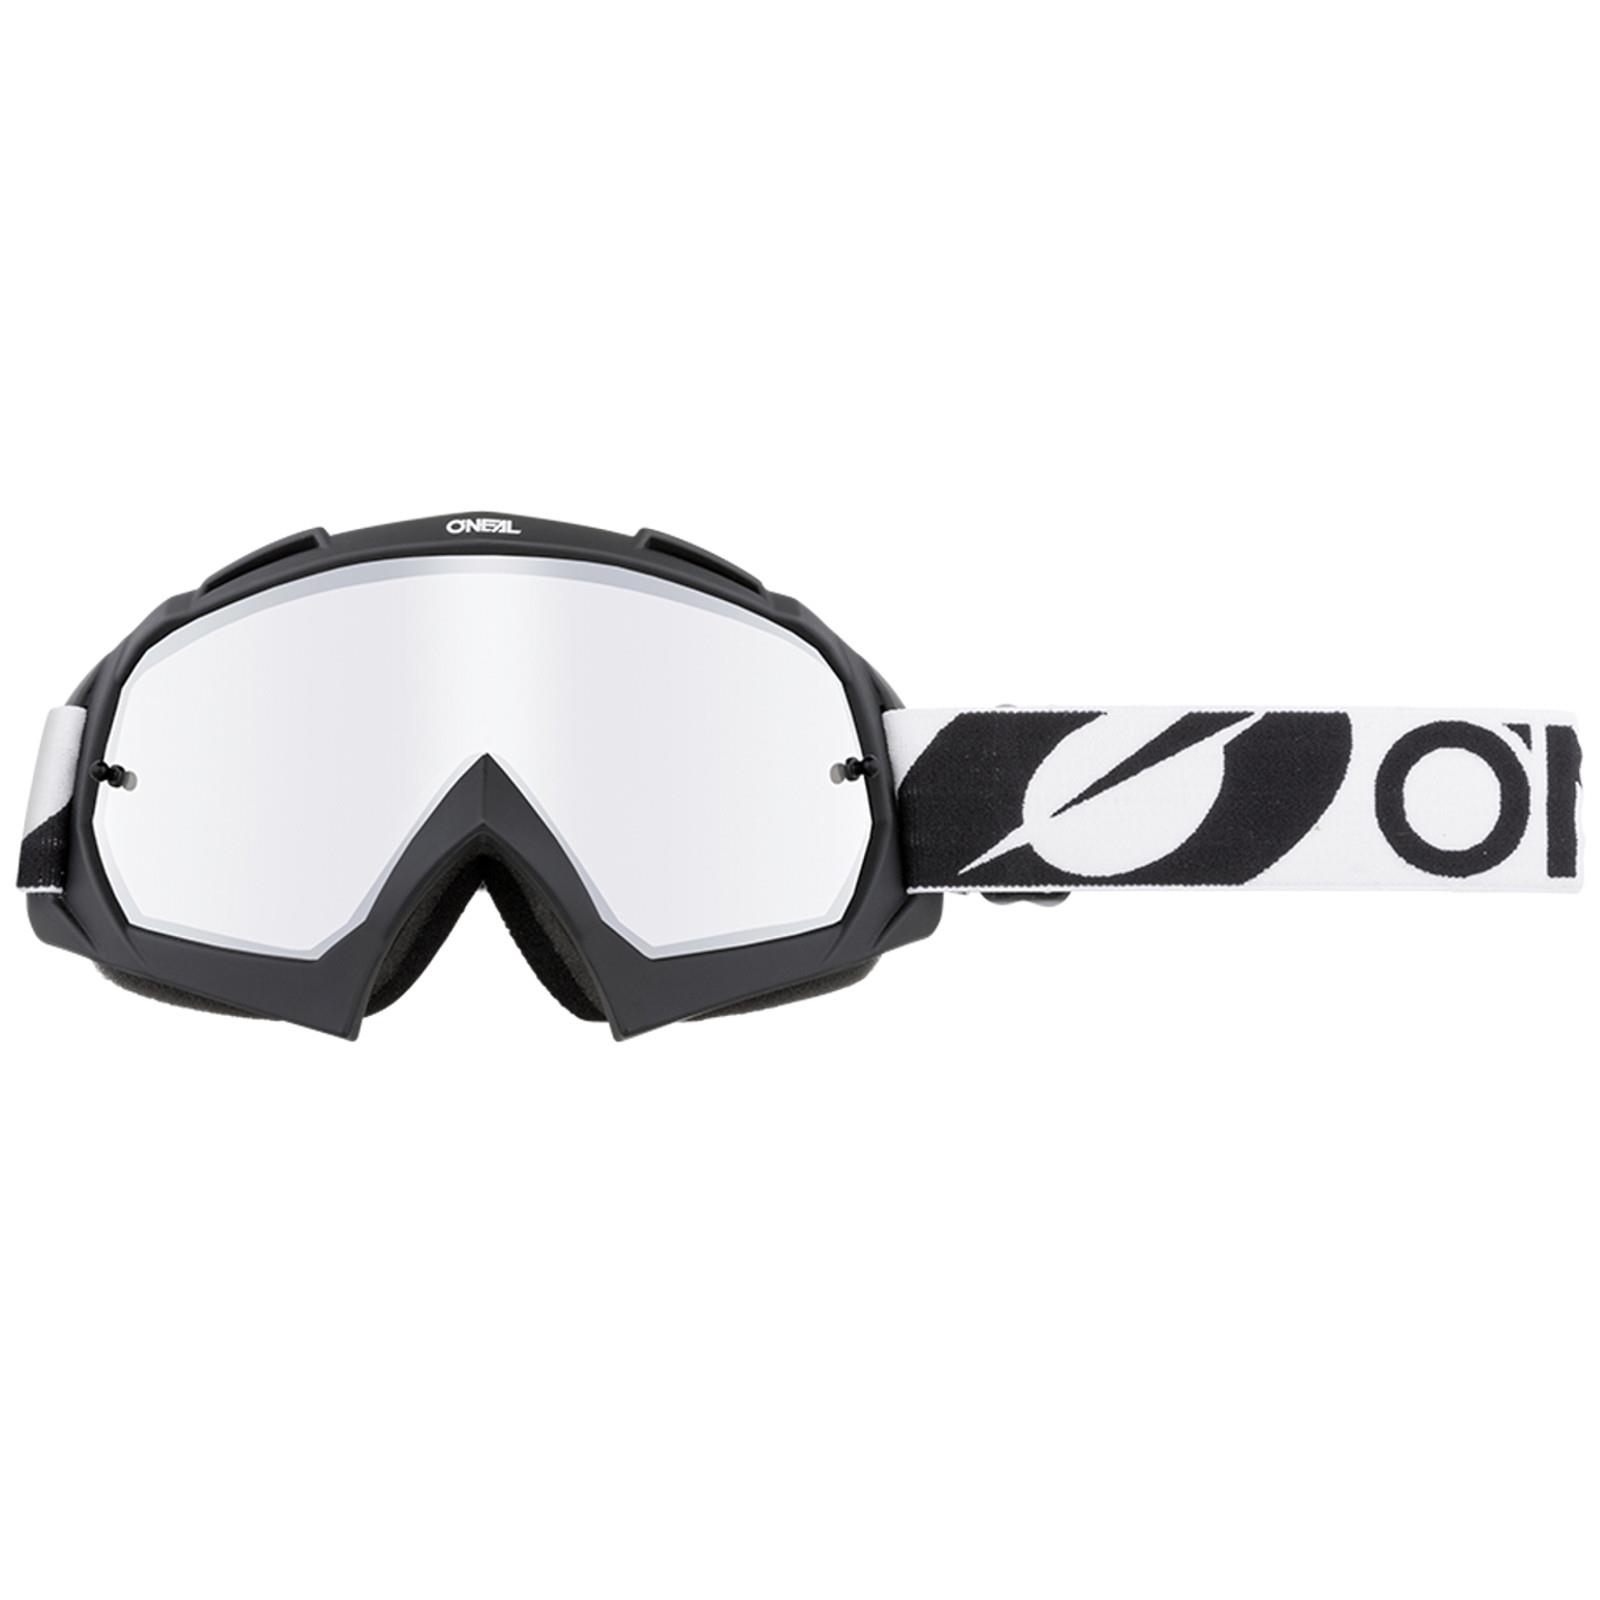 O'Neal Crossbrille B-10 Twoface Silber Motocross Helm Brille Downhill Freeride 